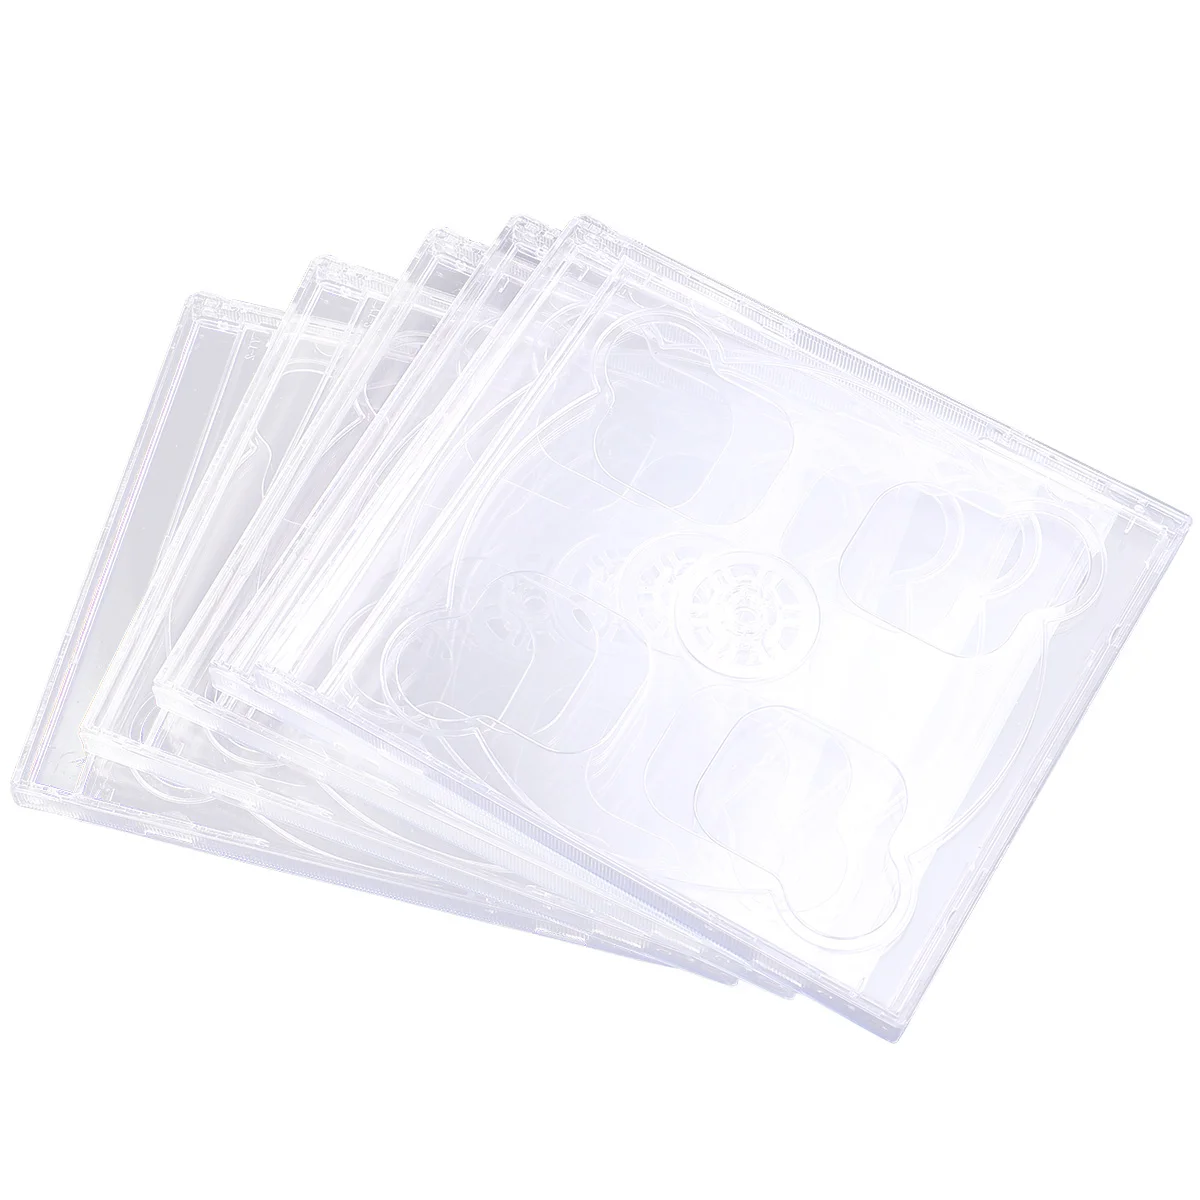 

5pcs Dual CD Jewel Case with Assembled Clear Tray Standard Empty Clear Replacement DVD Case Portable Clear Cd Cases Case